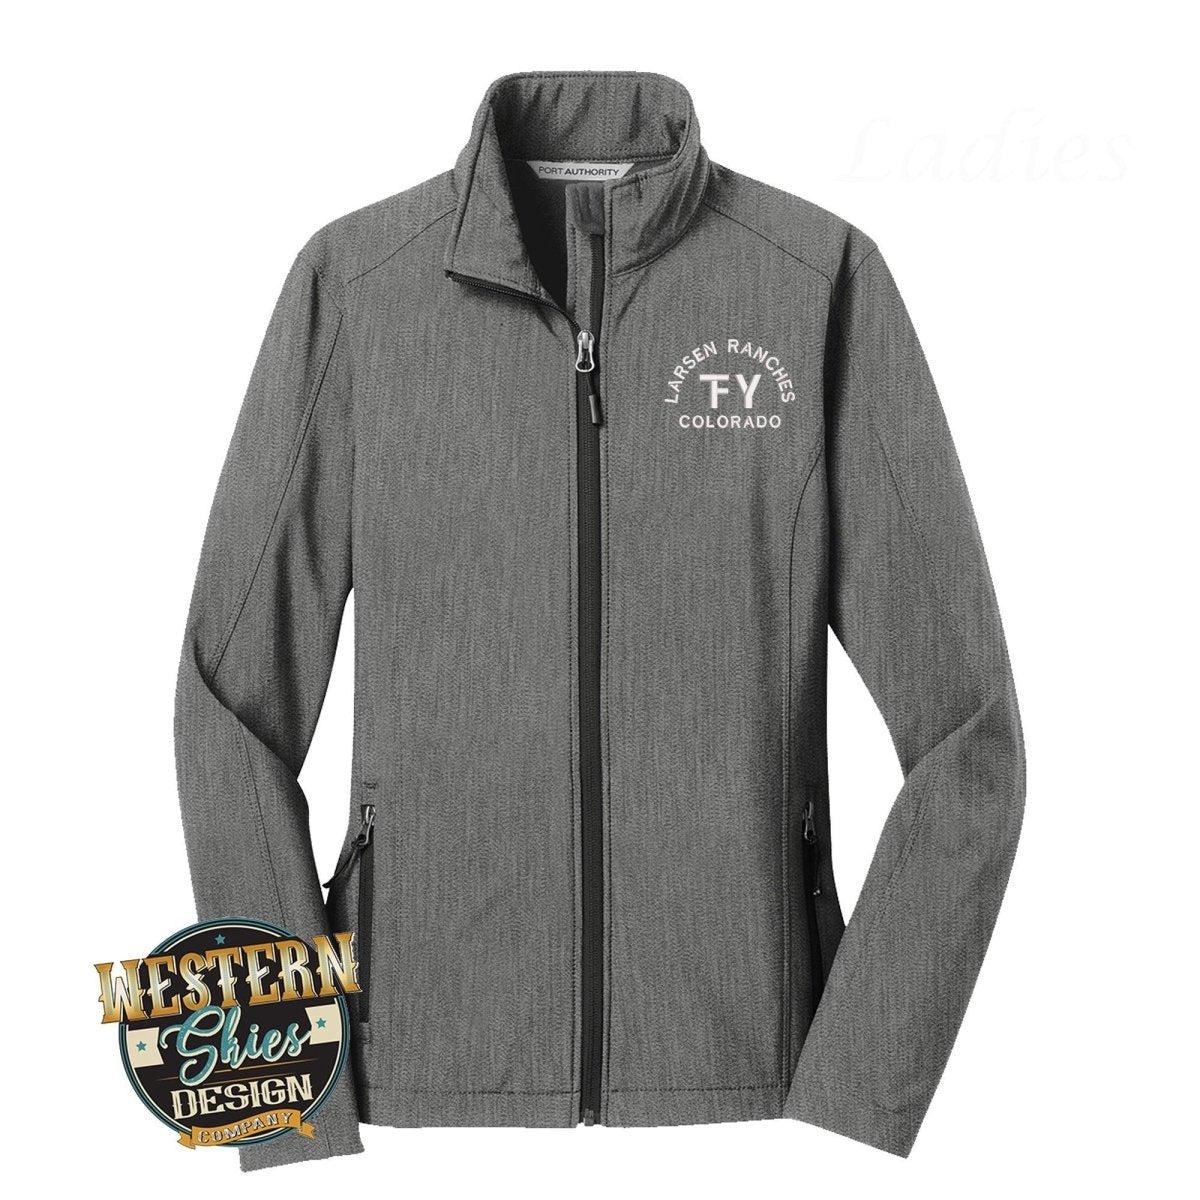 Port Authority® Ladies Core Soft Shell Jacket – Western Skies Design Company